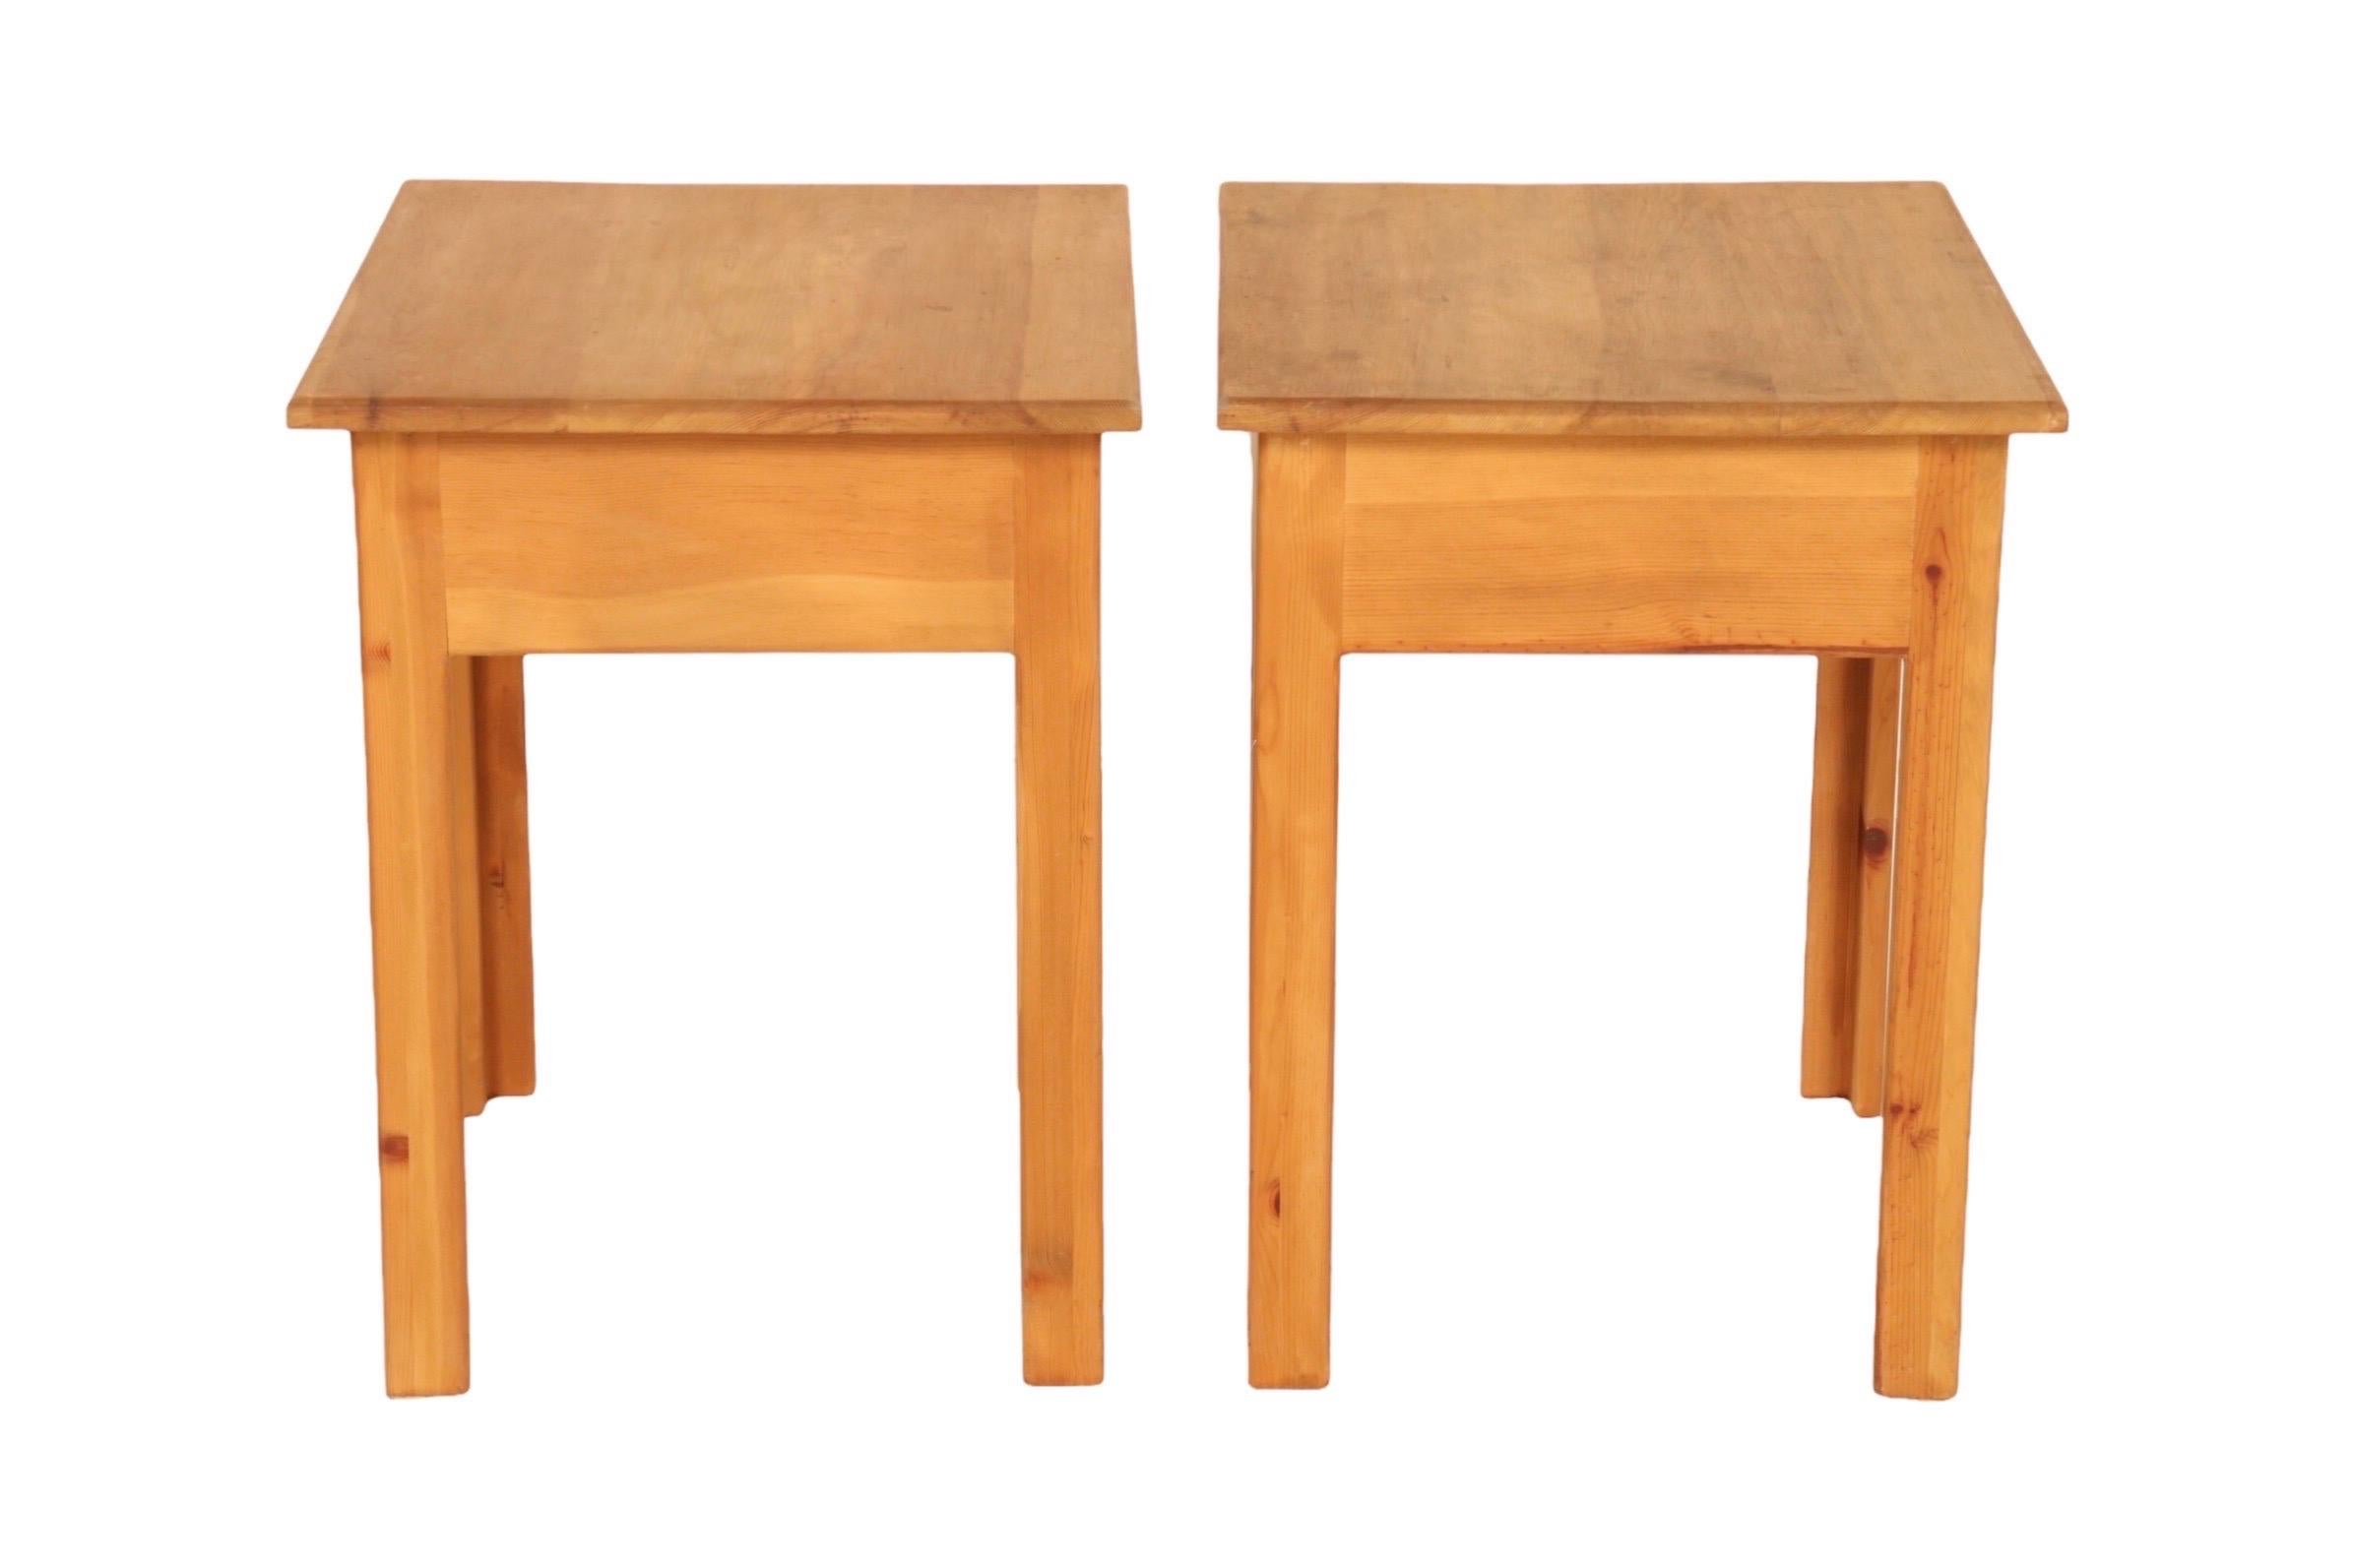 Wood Craftsman Pine Side Tables, a Pair For Sale